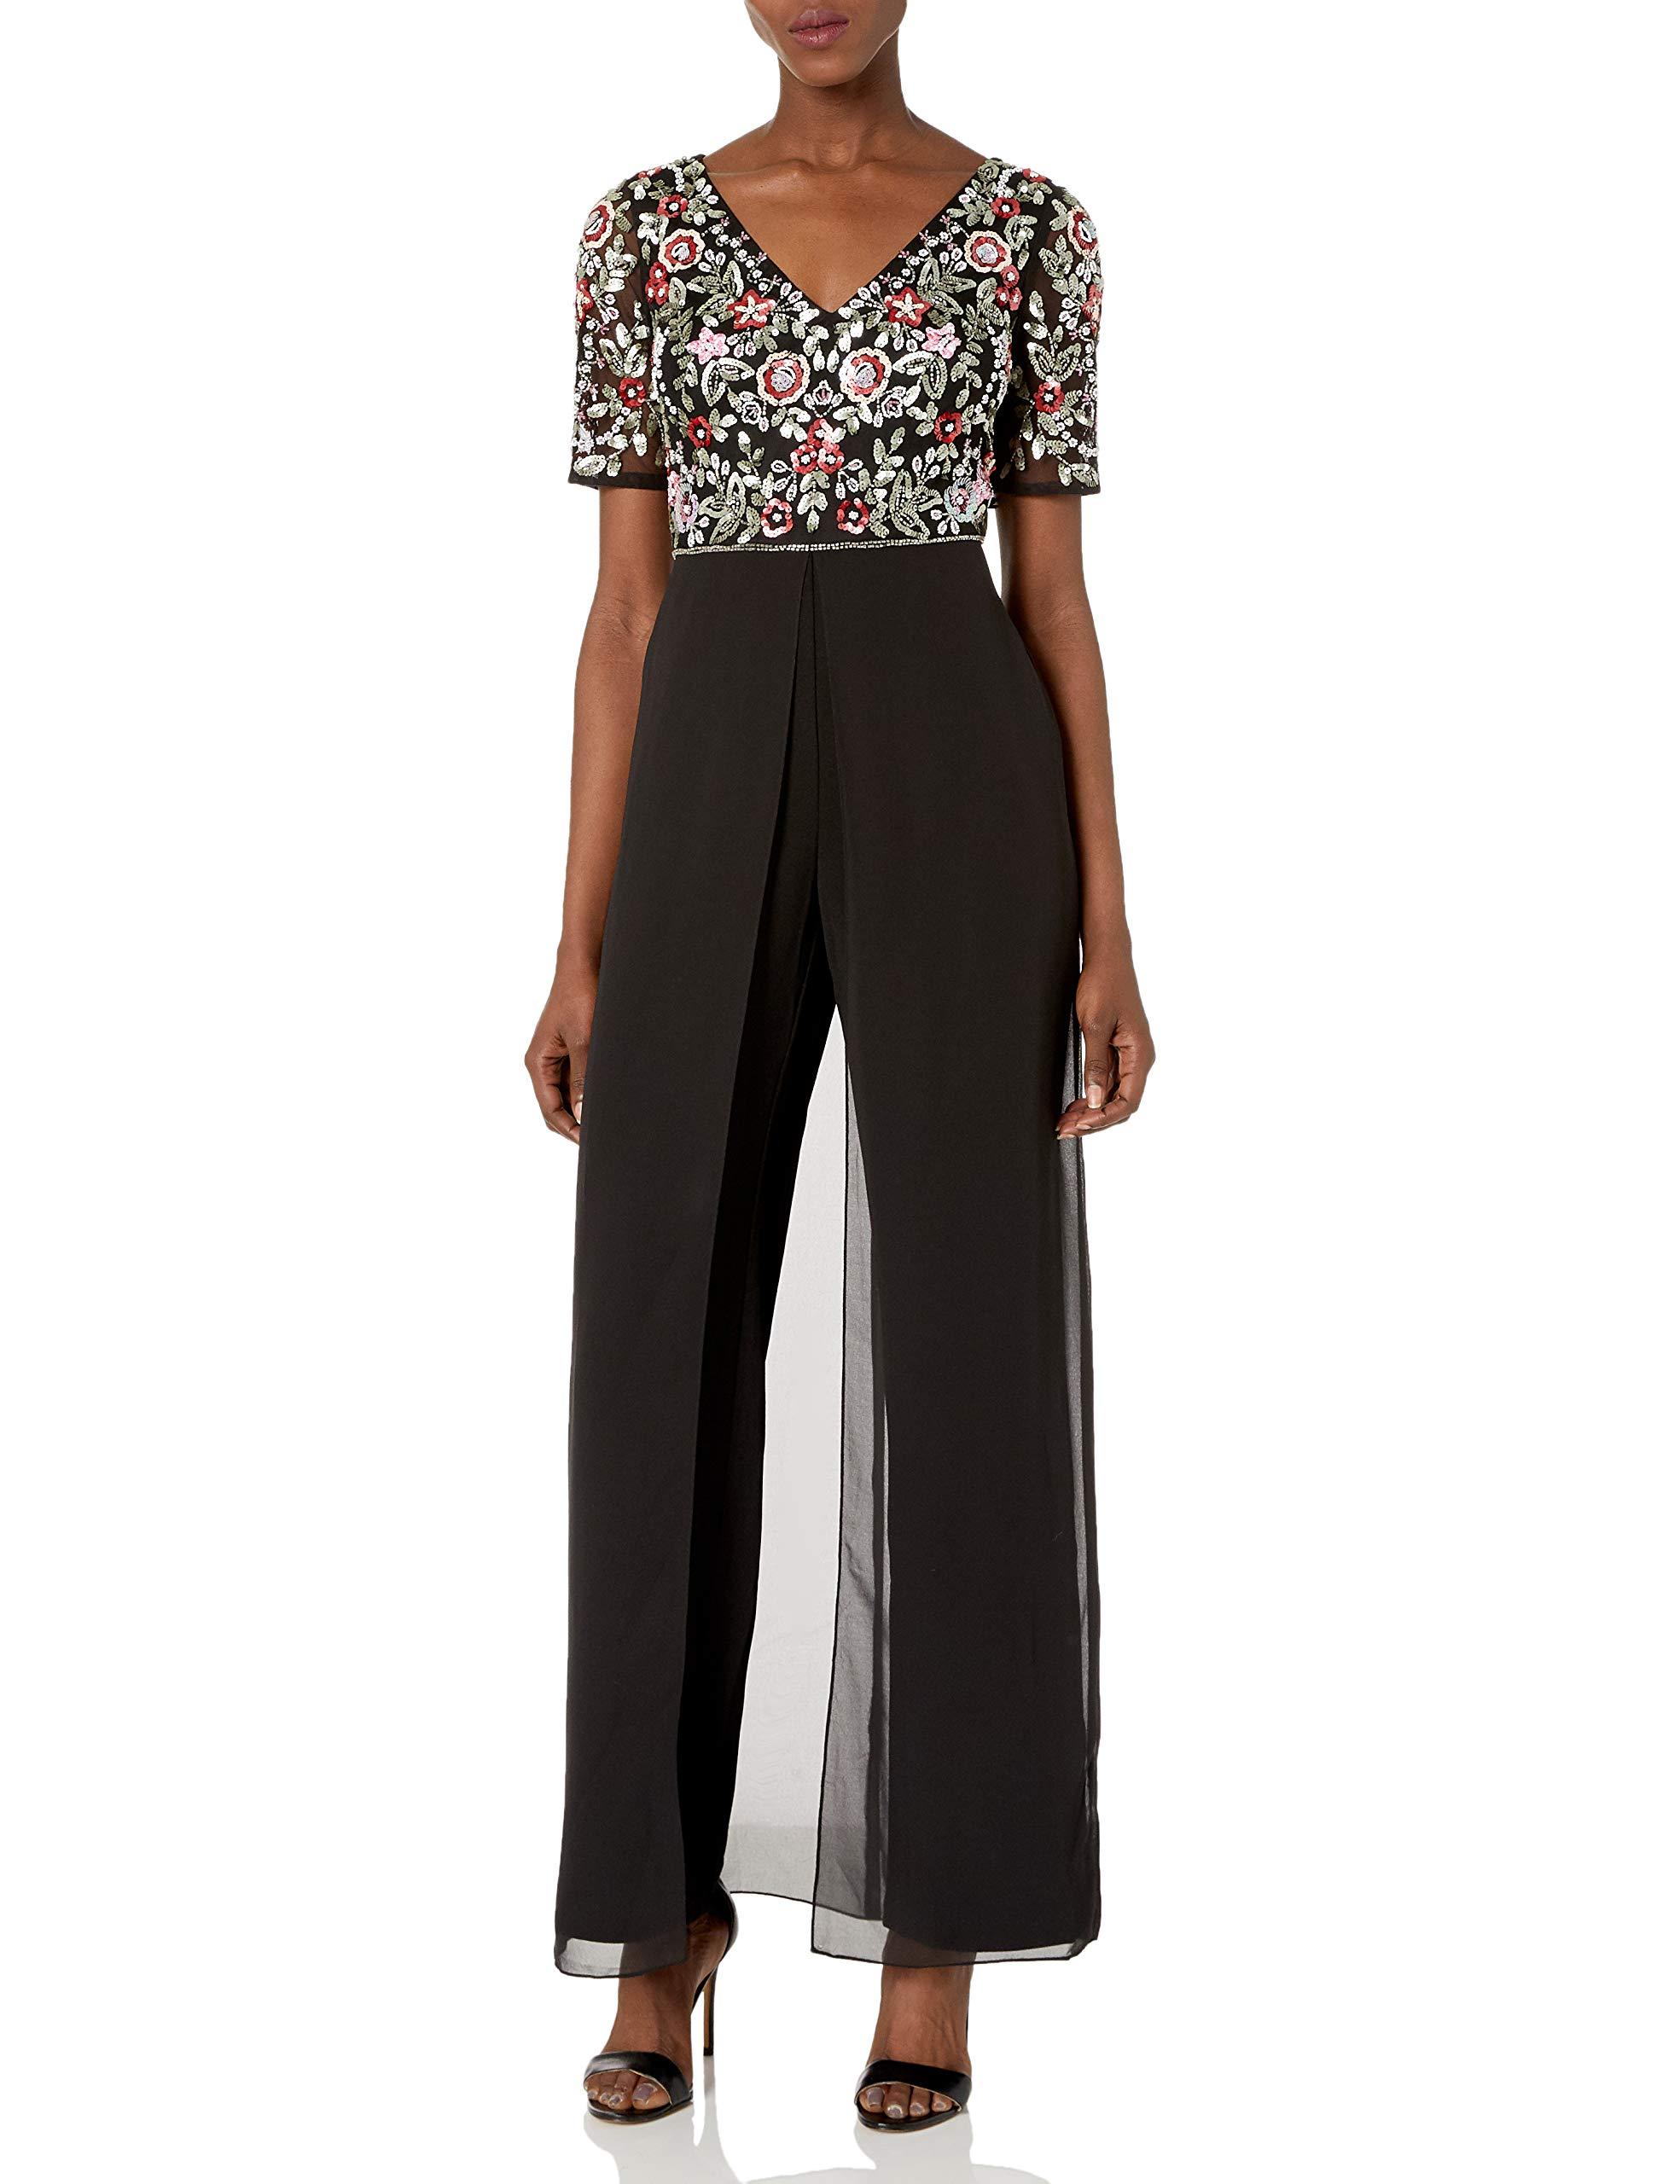 Adrianna Papell Floral Embellished Jumpsuit With Sheer Skirt in 